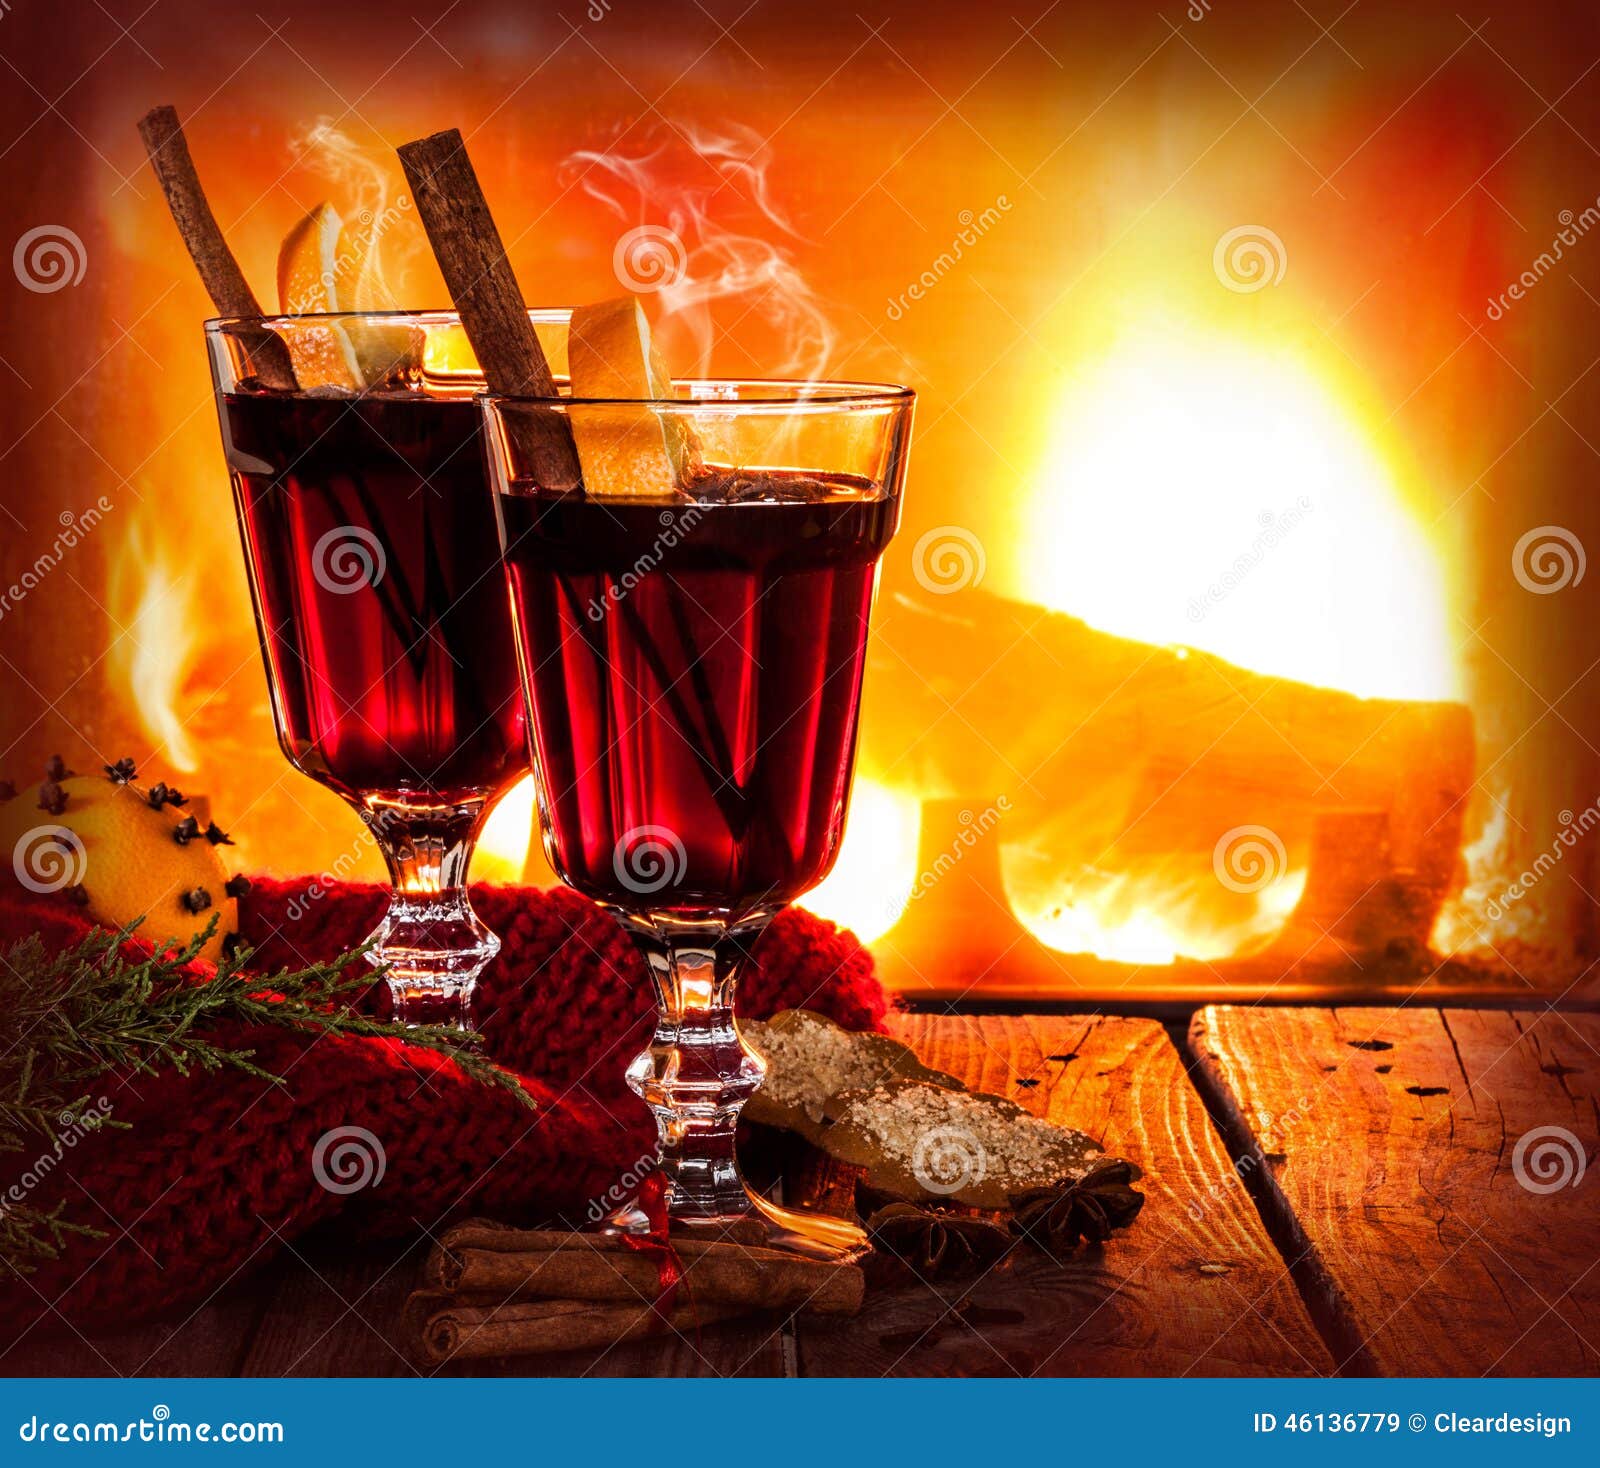 Hot Mulled Wine On Fireplace Background - Winter Warming 